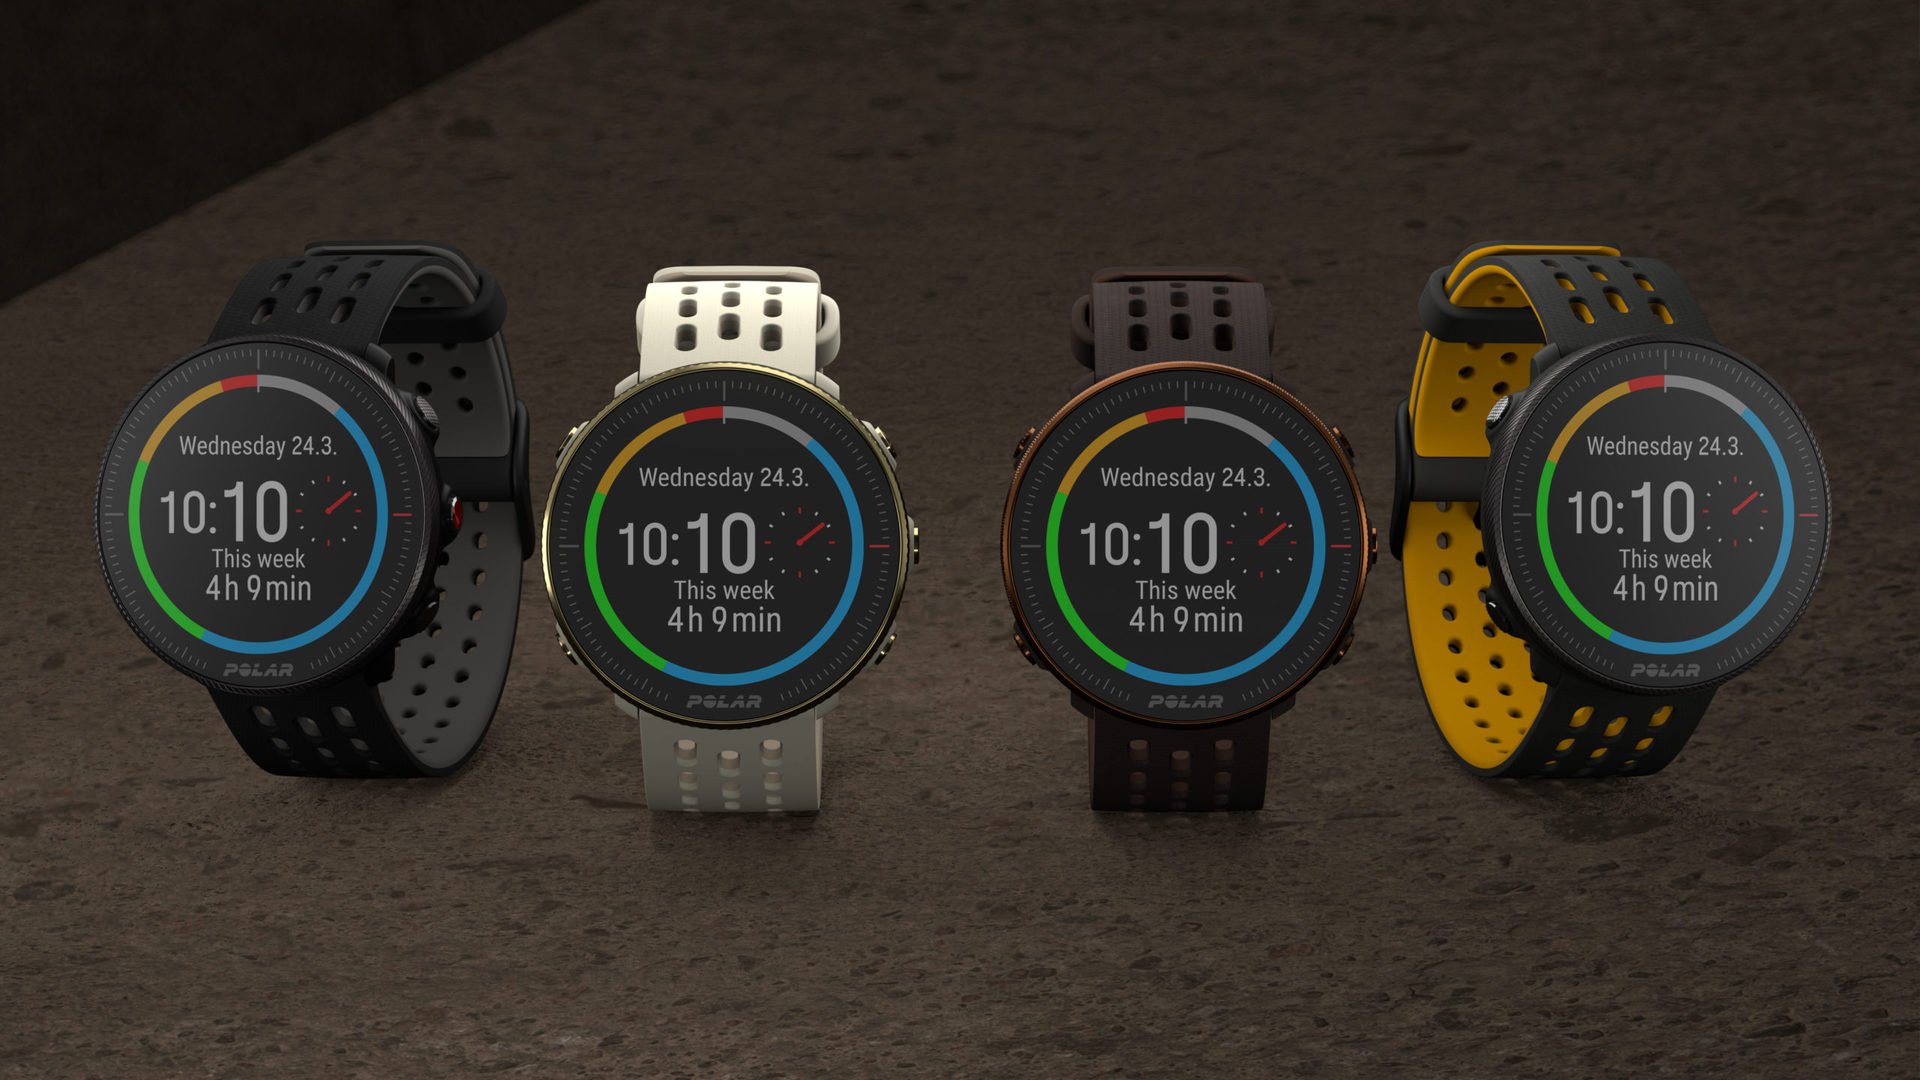 The Polar Vantage M2 series, available in multiple colorways, represents the company's best budget multisport smartwatch.